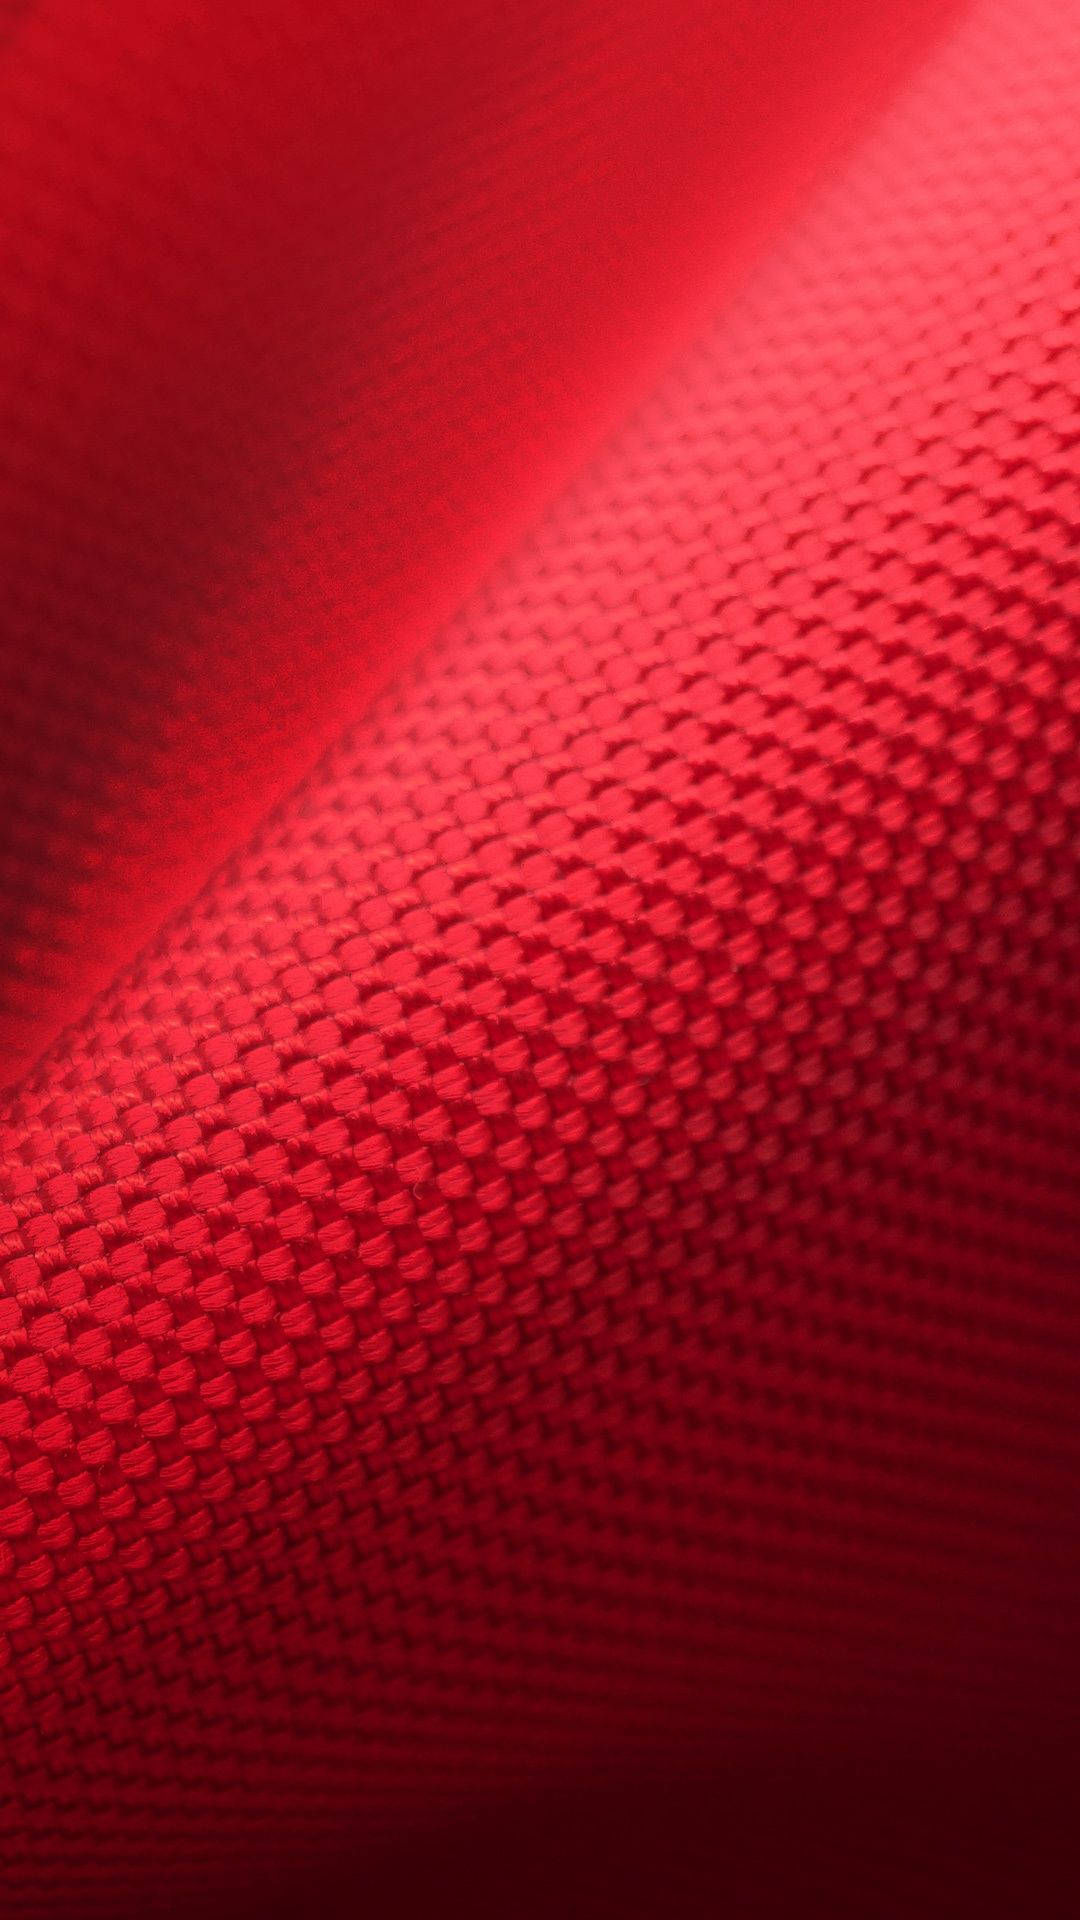 Textured Pure Red Fabric Background